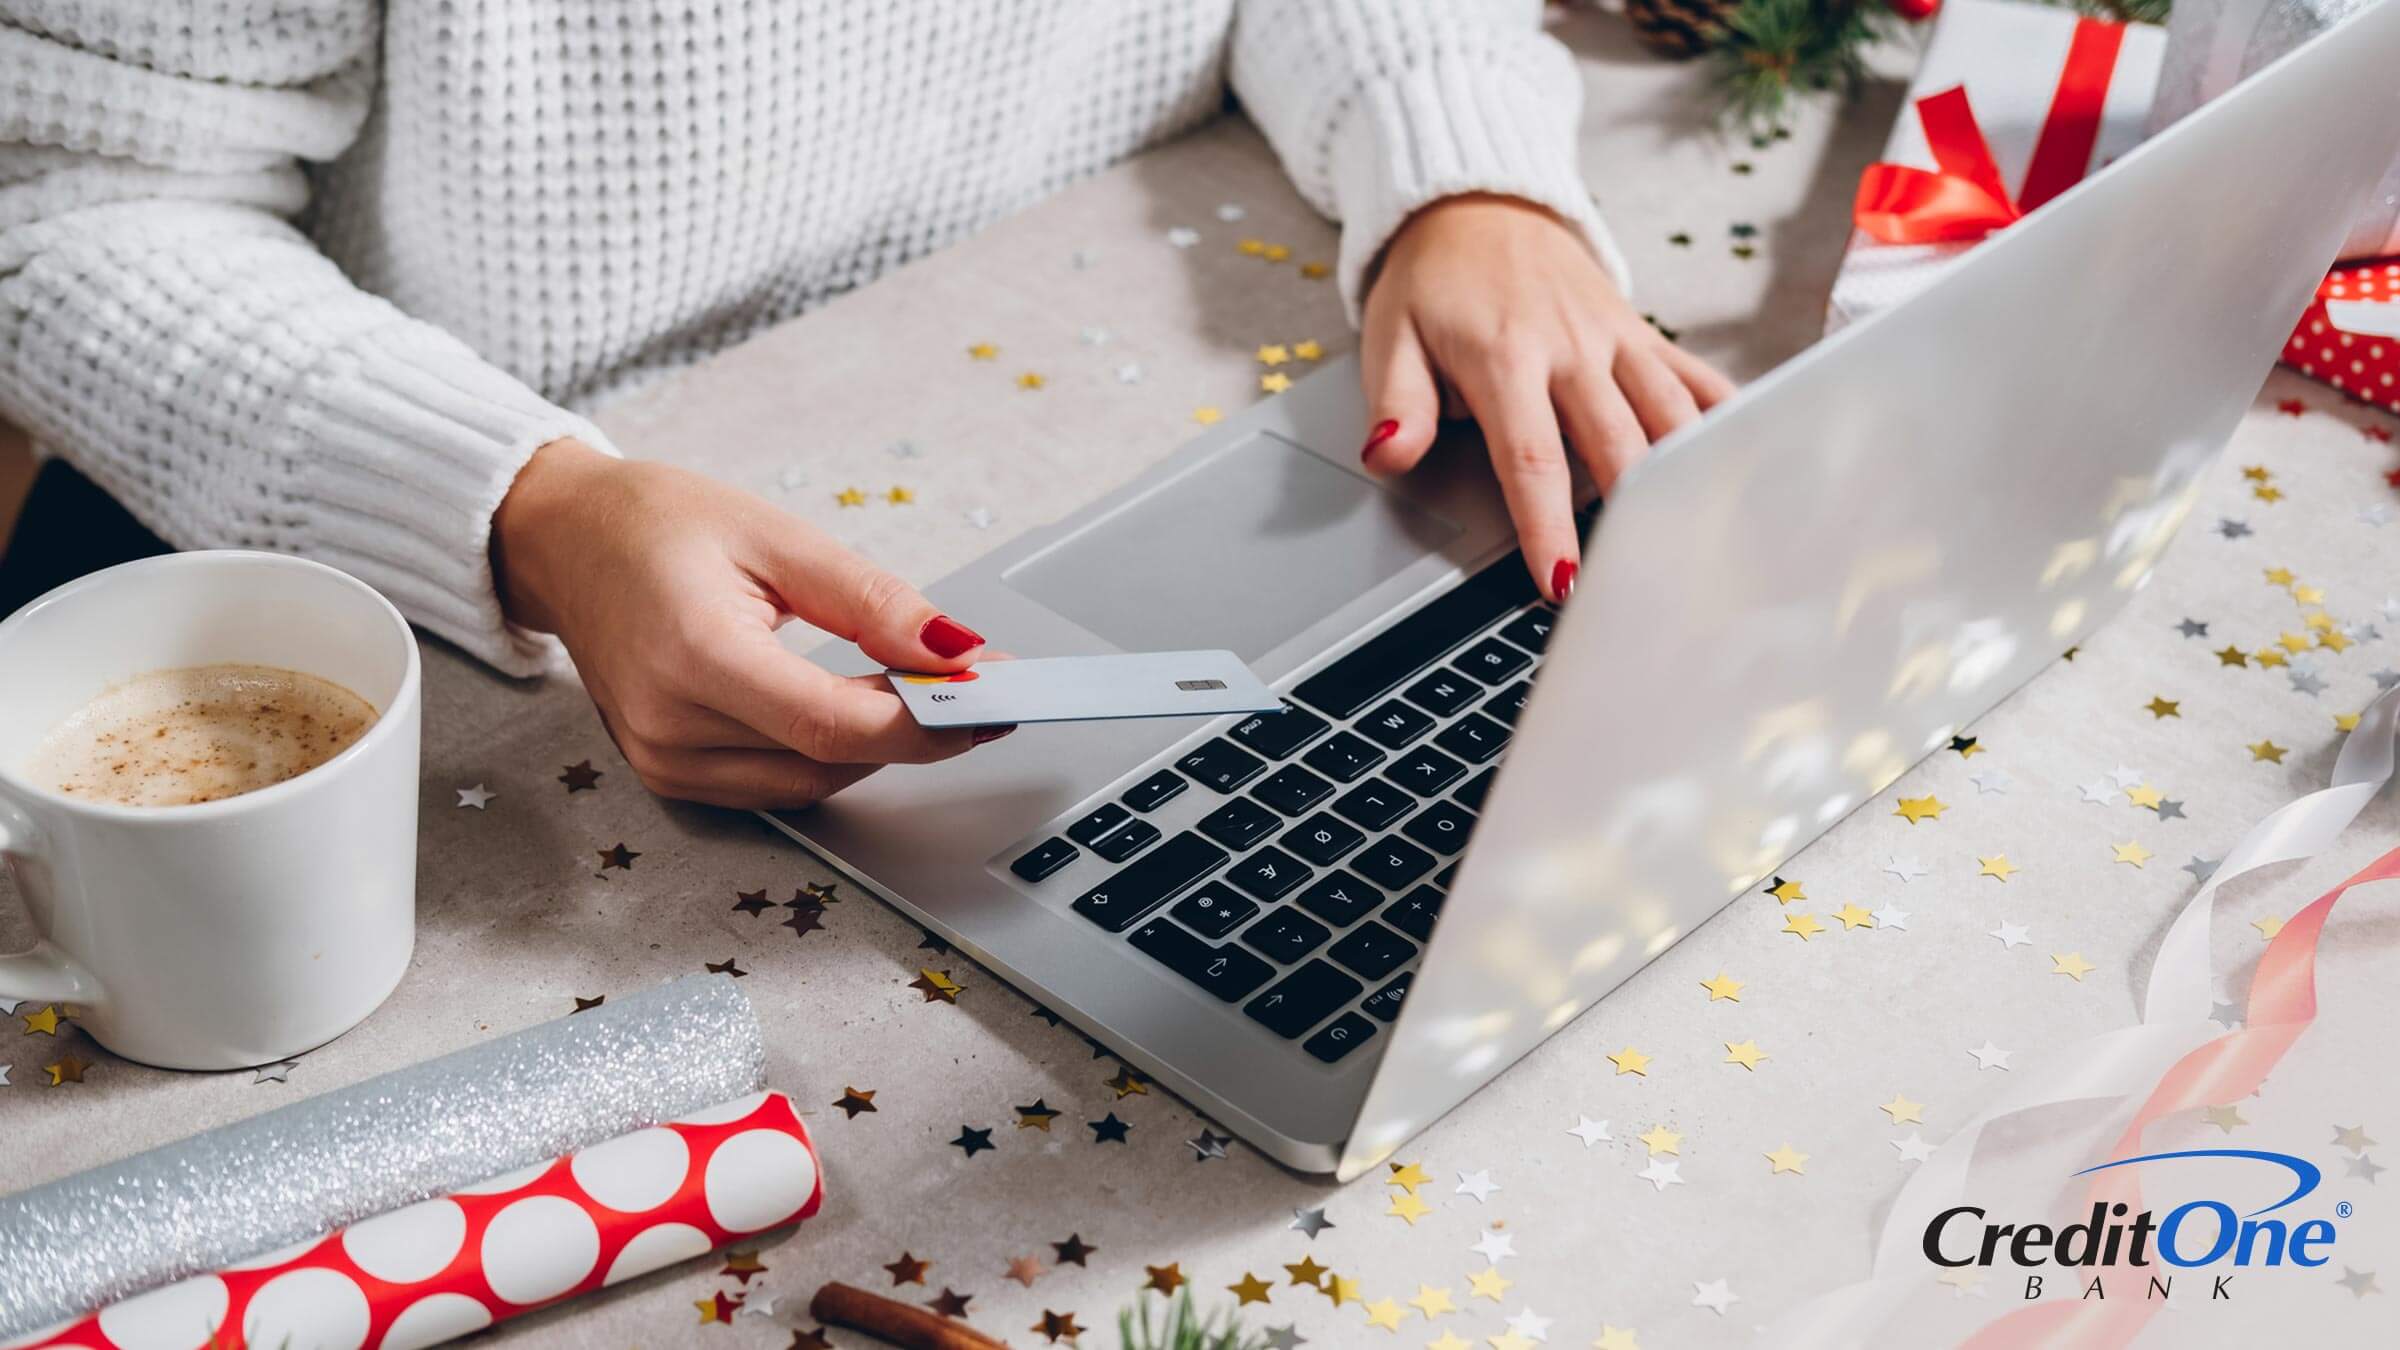 A woman’s hands are seen using her laptop and holding a credit card as she does her holiday shopping online with wrapping paper on the desk.